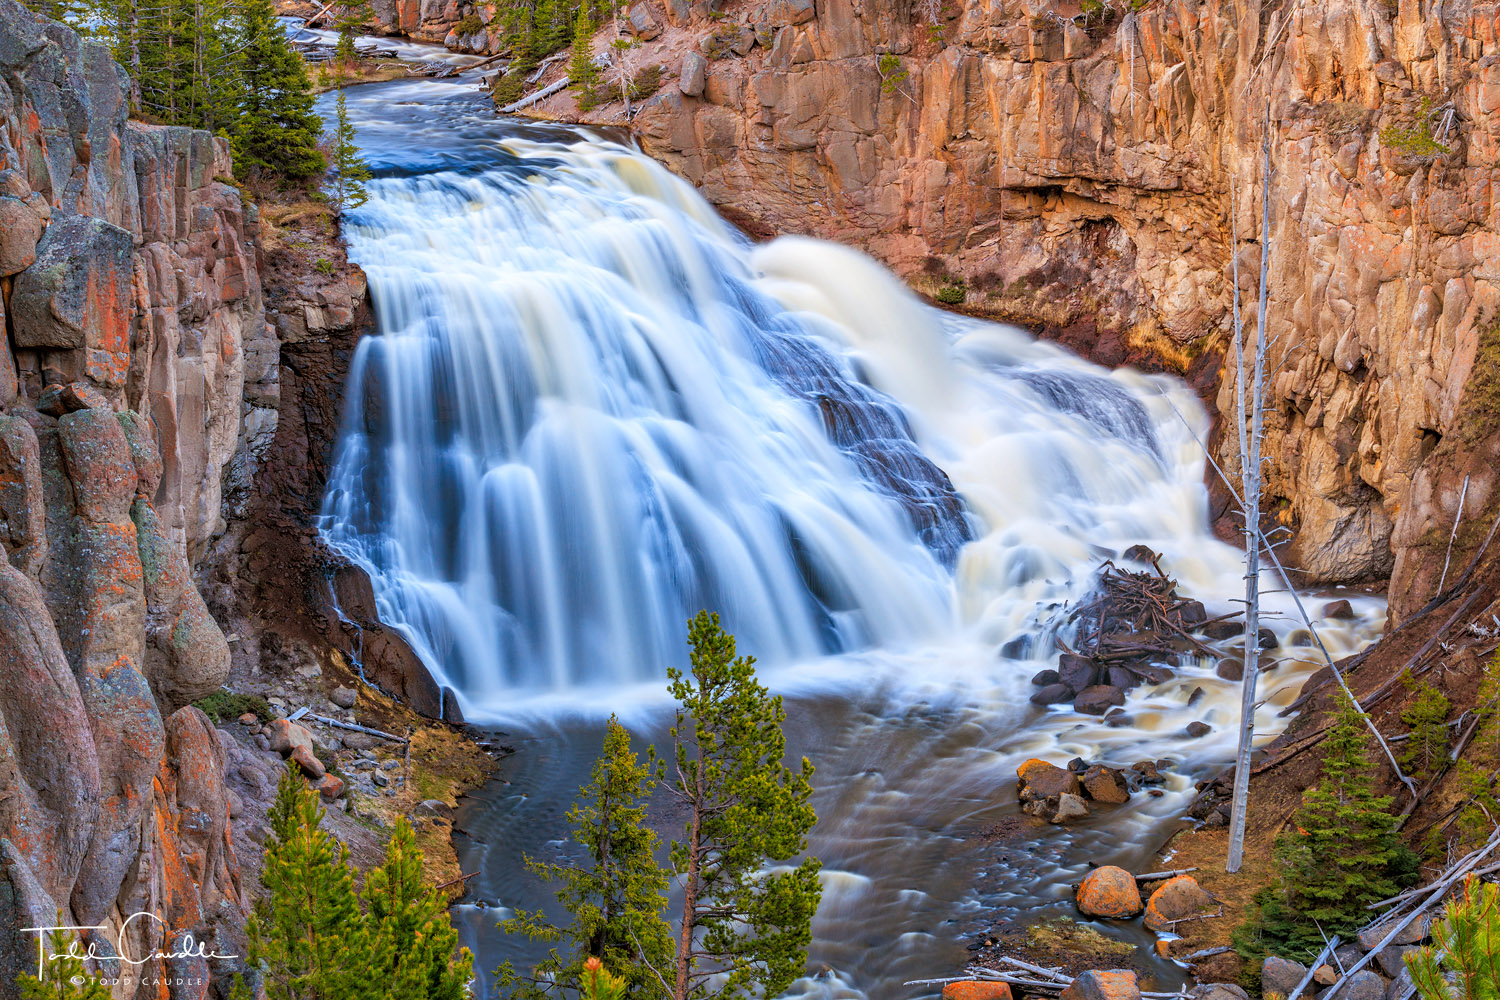 Spring snowmelt engorges Gibbon Falls along the Gibbon River in Yellowstone National Park. The loud rush of water was almost...